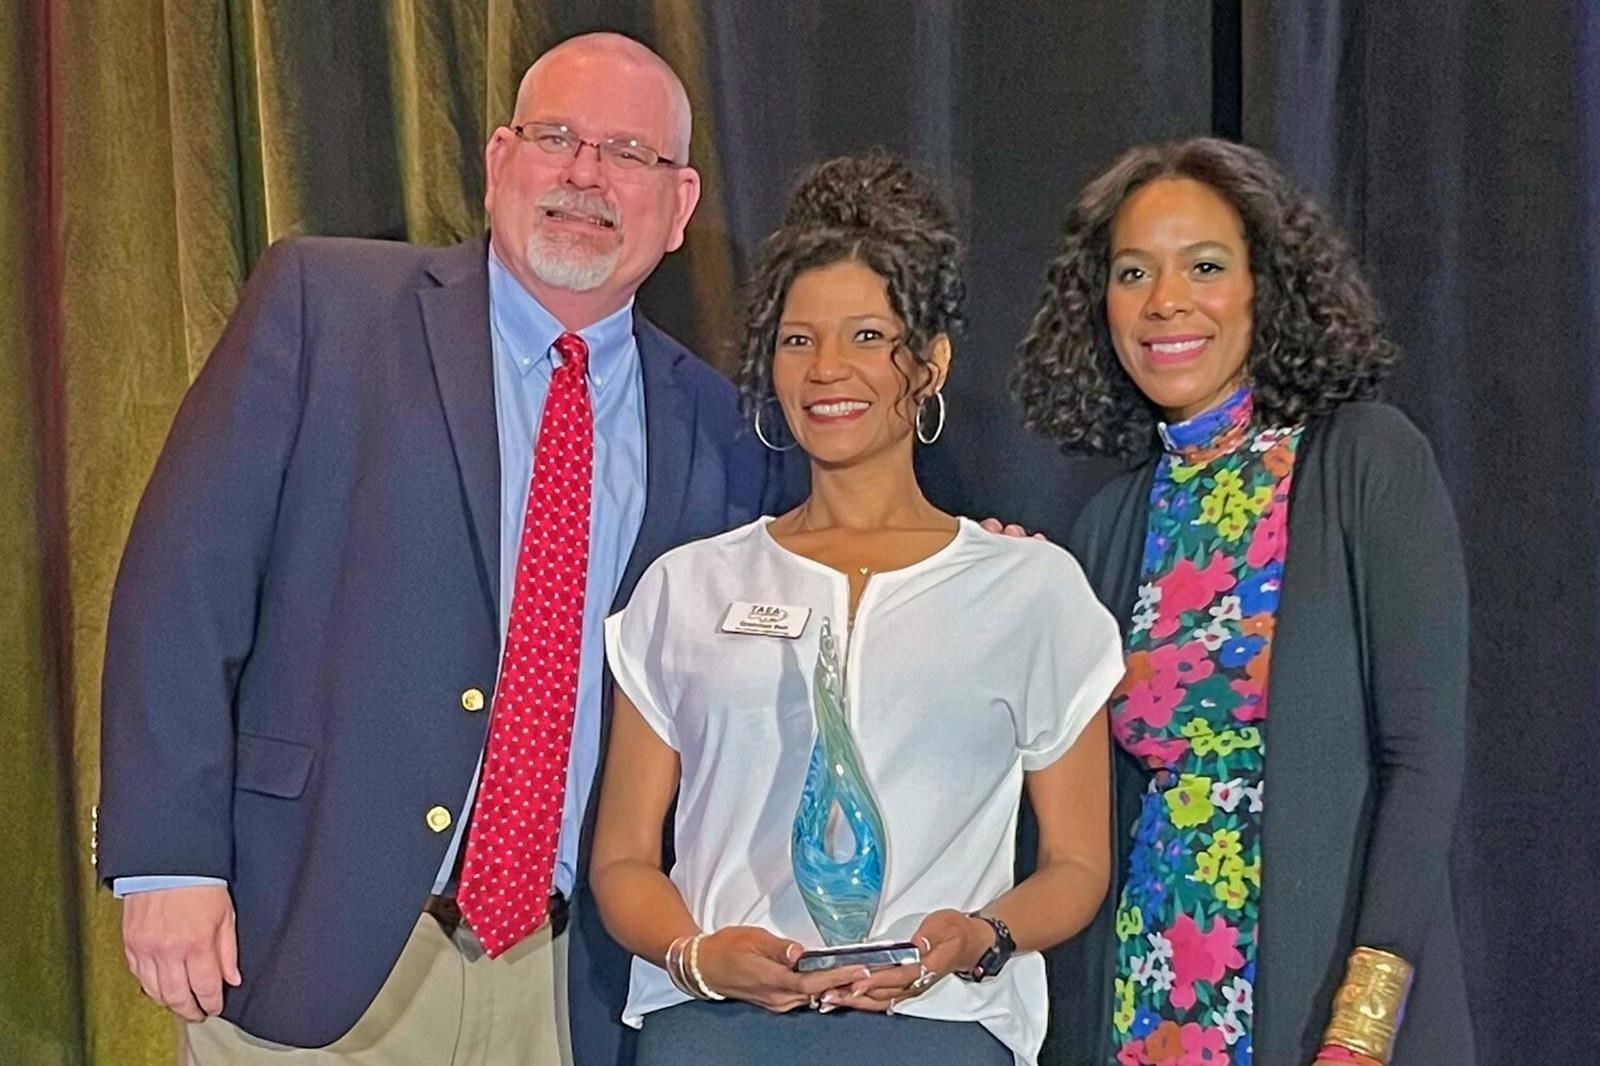 Hairgrove Elementary School art teacher Gretchen Bell-Young, middle, was named the 2023 Texas Art Educator of the Year.